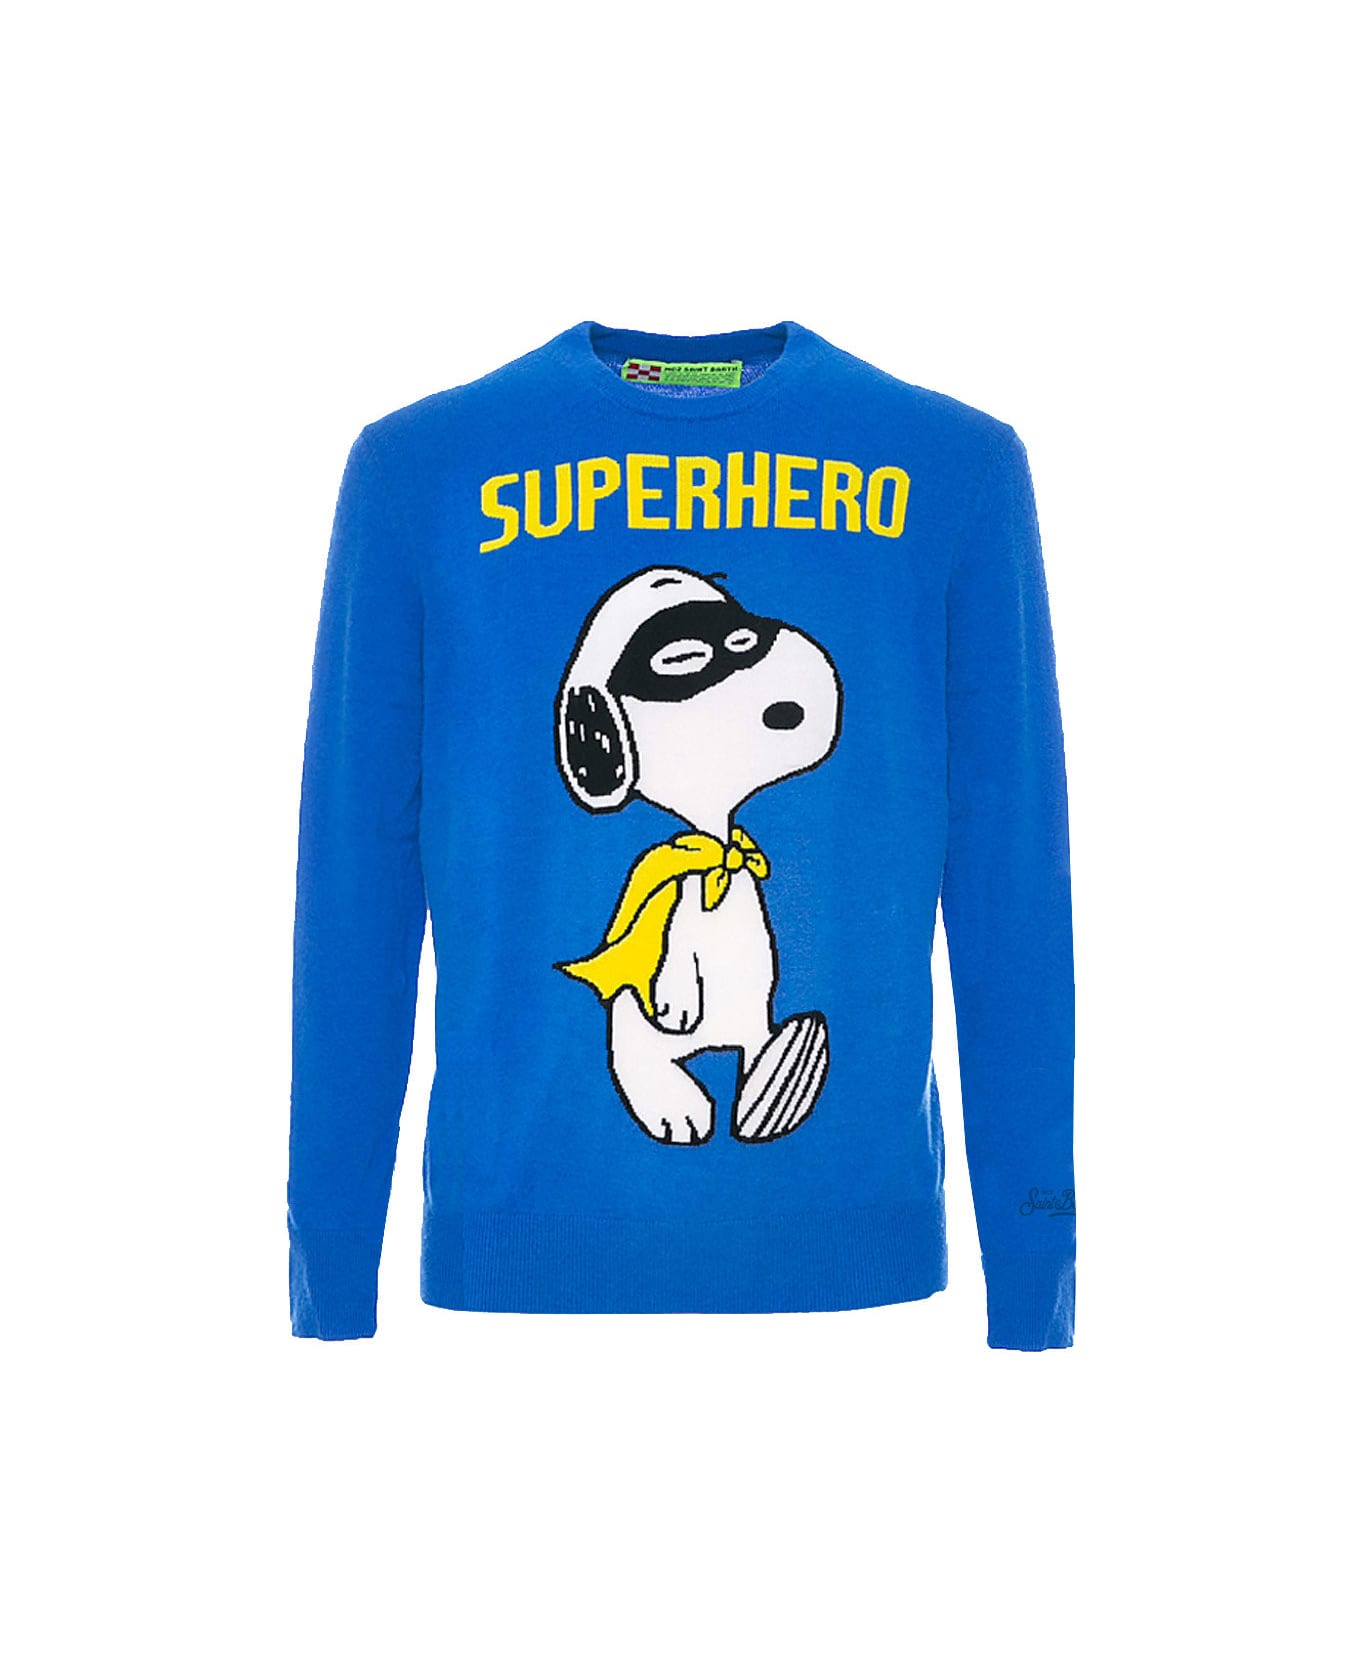 MC2 Saint Barth Man Lightweight Sweater With Snoopy Jacquard Print | Snoopy Peanuts Special Edition - BLUE